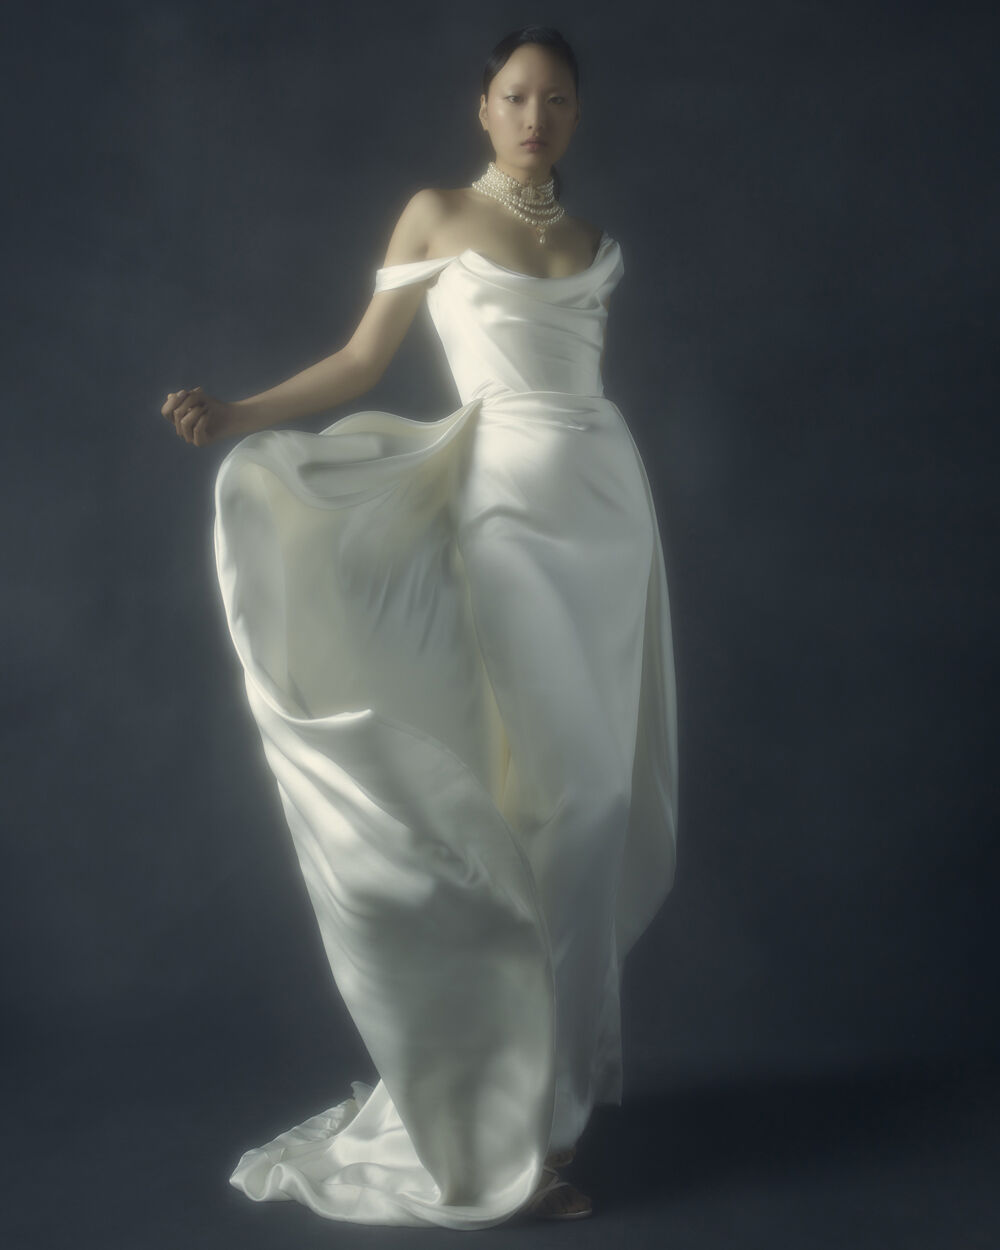 Vivienne Westwood Bridal and Couture 2021 - Over The Moon  Vivienne  westwood bridal, Vivienne westwood wedding, Vivienne westwood wedding dress